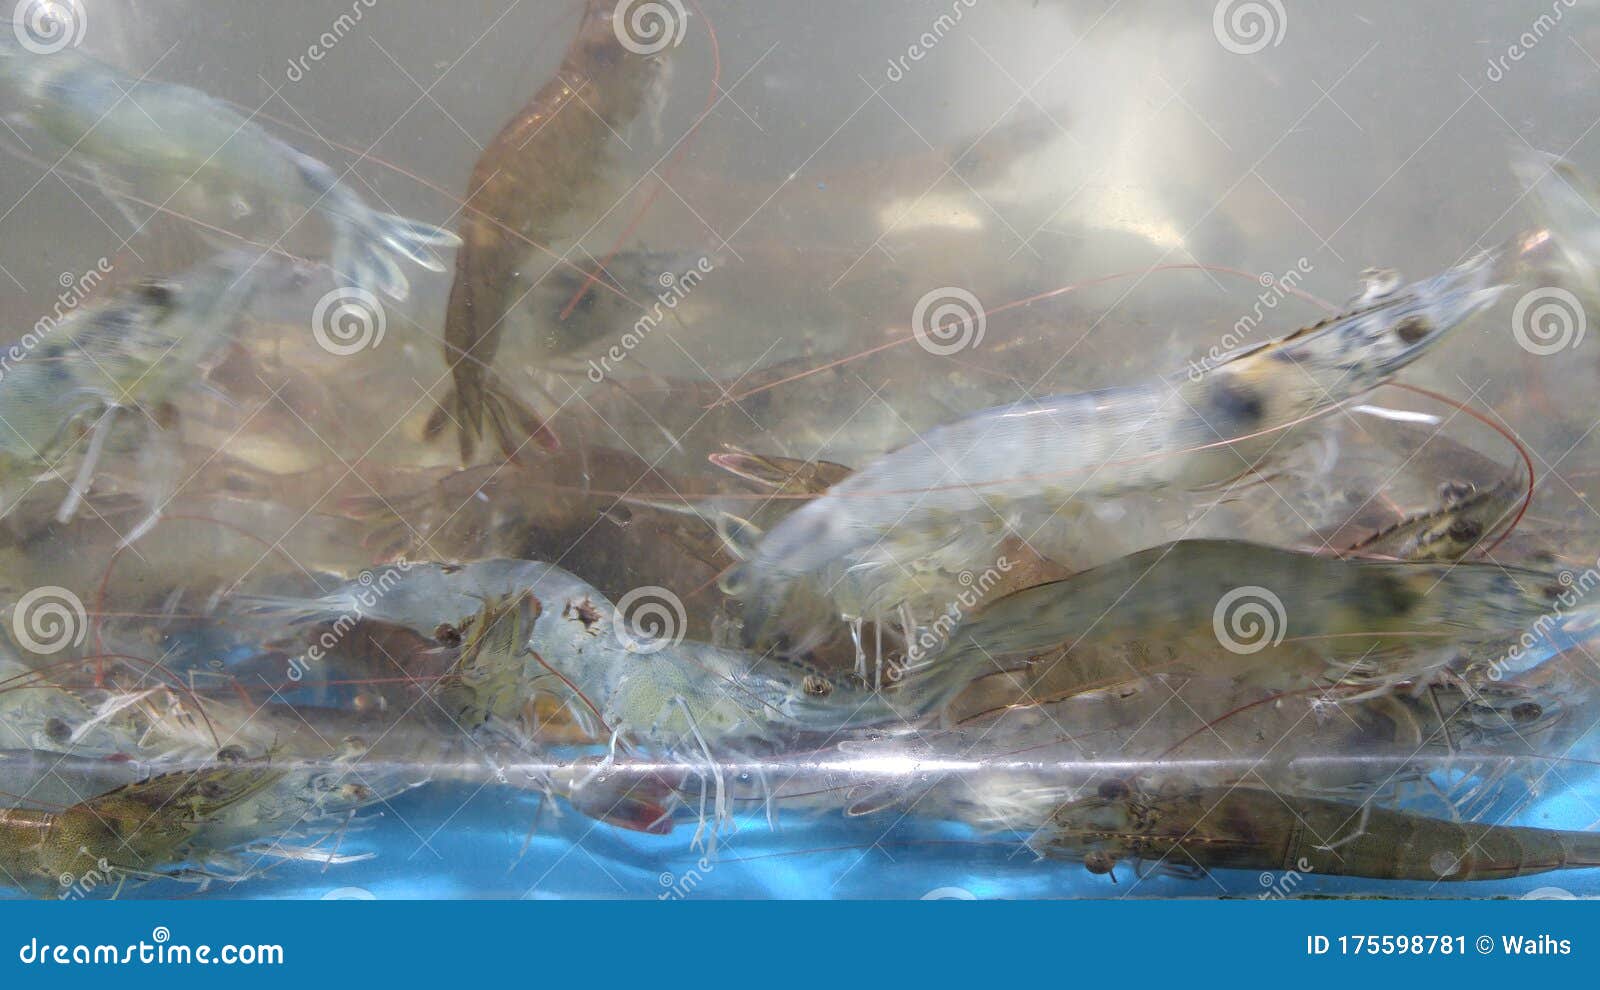 Live Shrimp Swim in Glass Tanks in the Fish Section of the Supermarket,  Waiting for Customers To Buy Them Stock Image - Image of china,  supermarket: 175598781